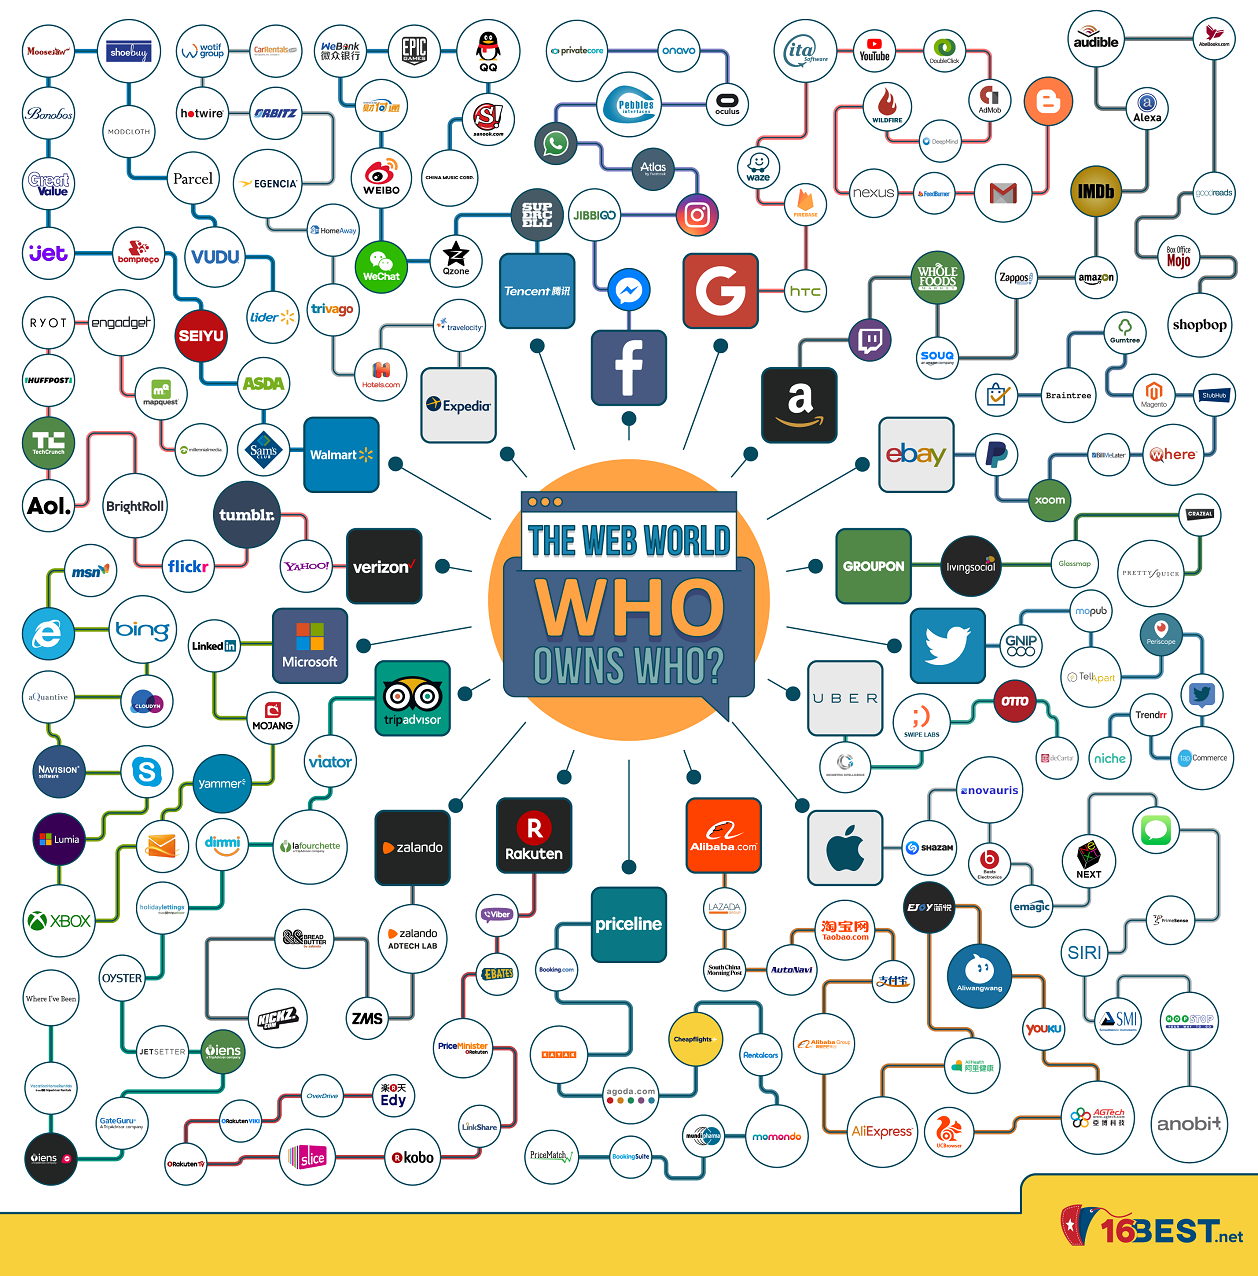 The Web World: Who Owns Who? #infographic